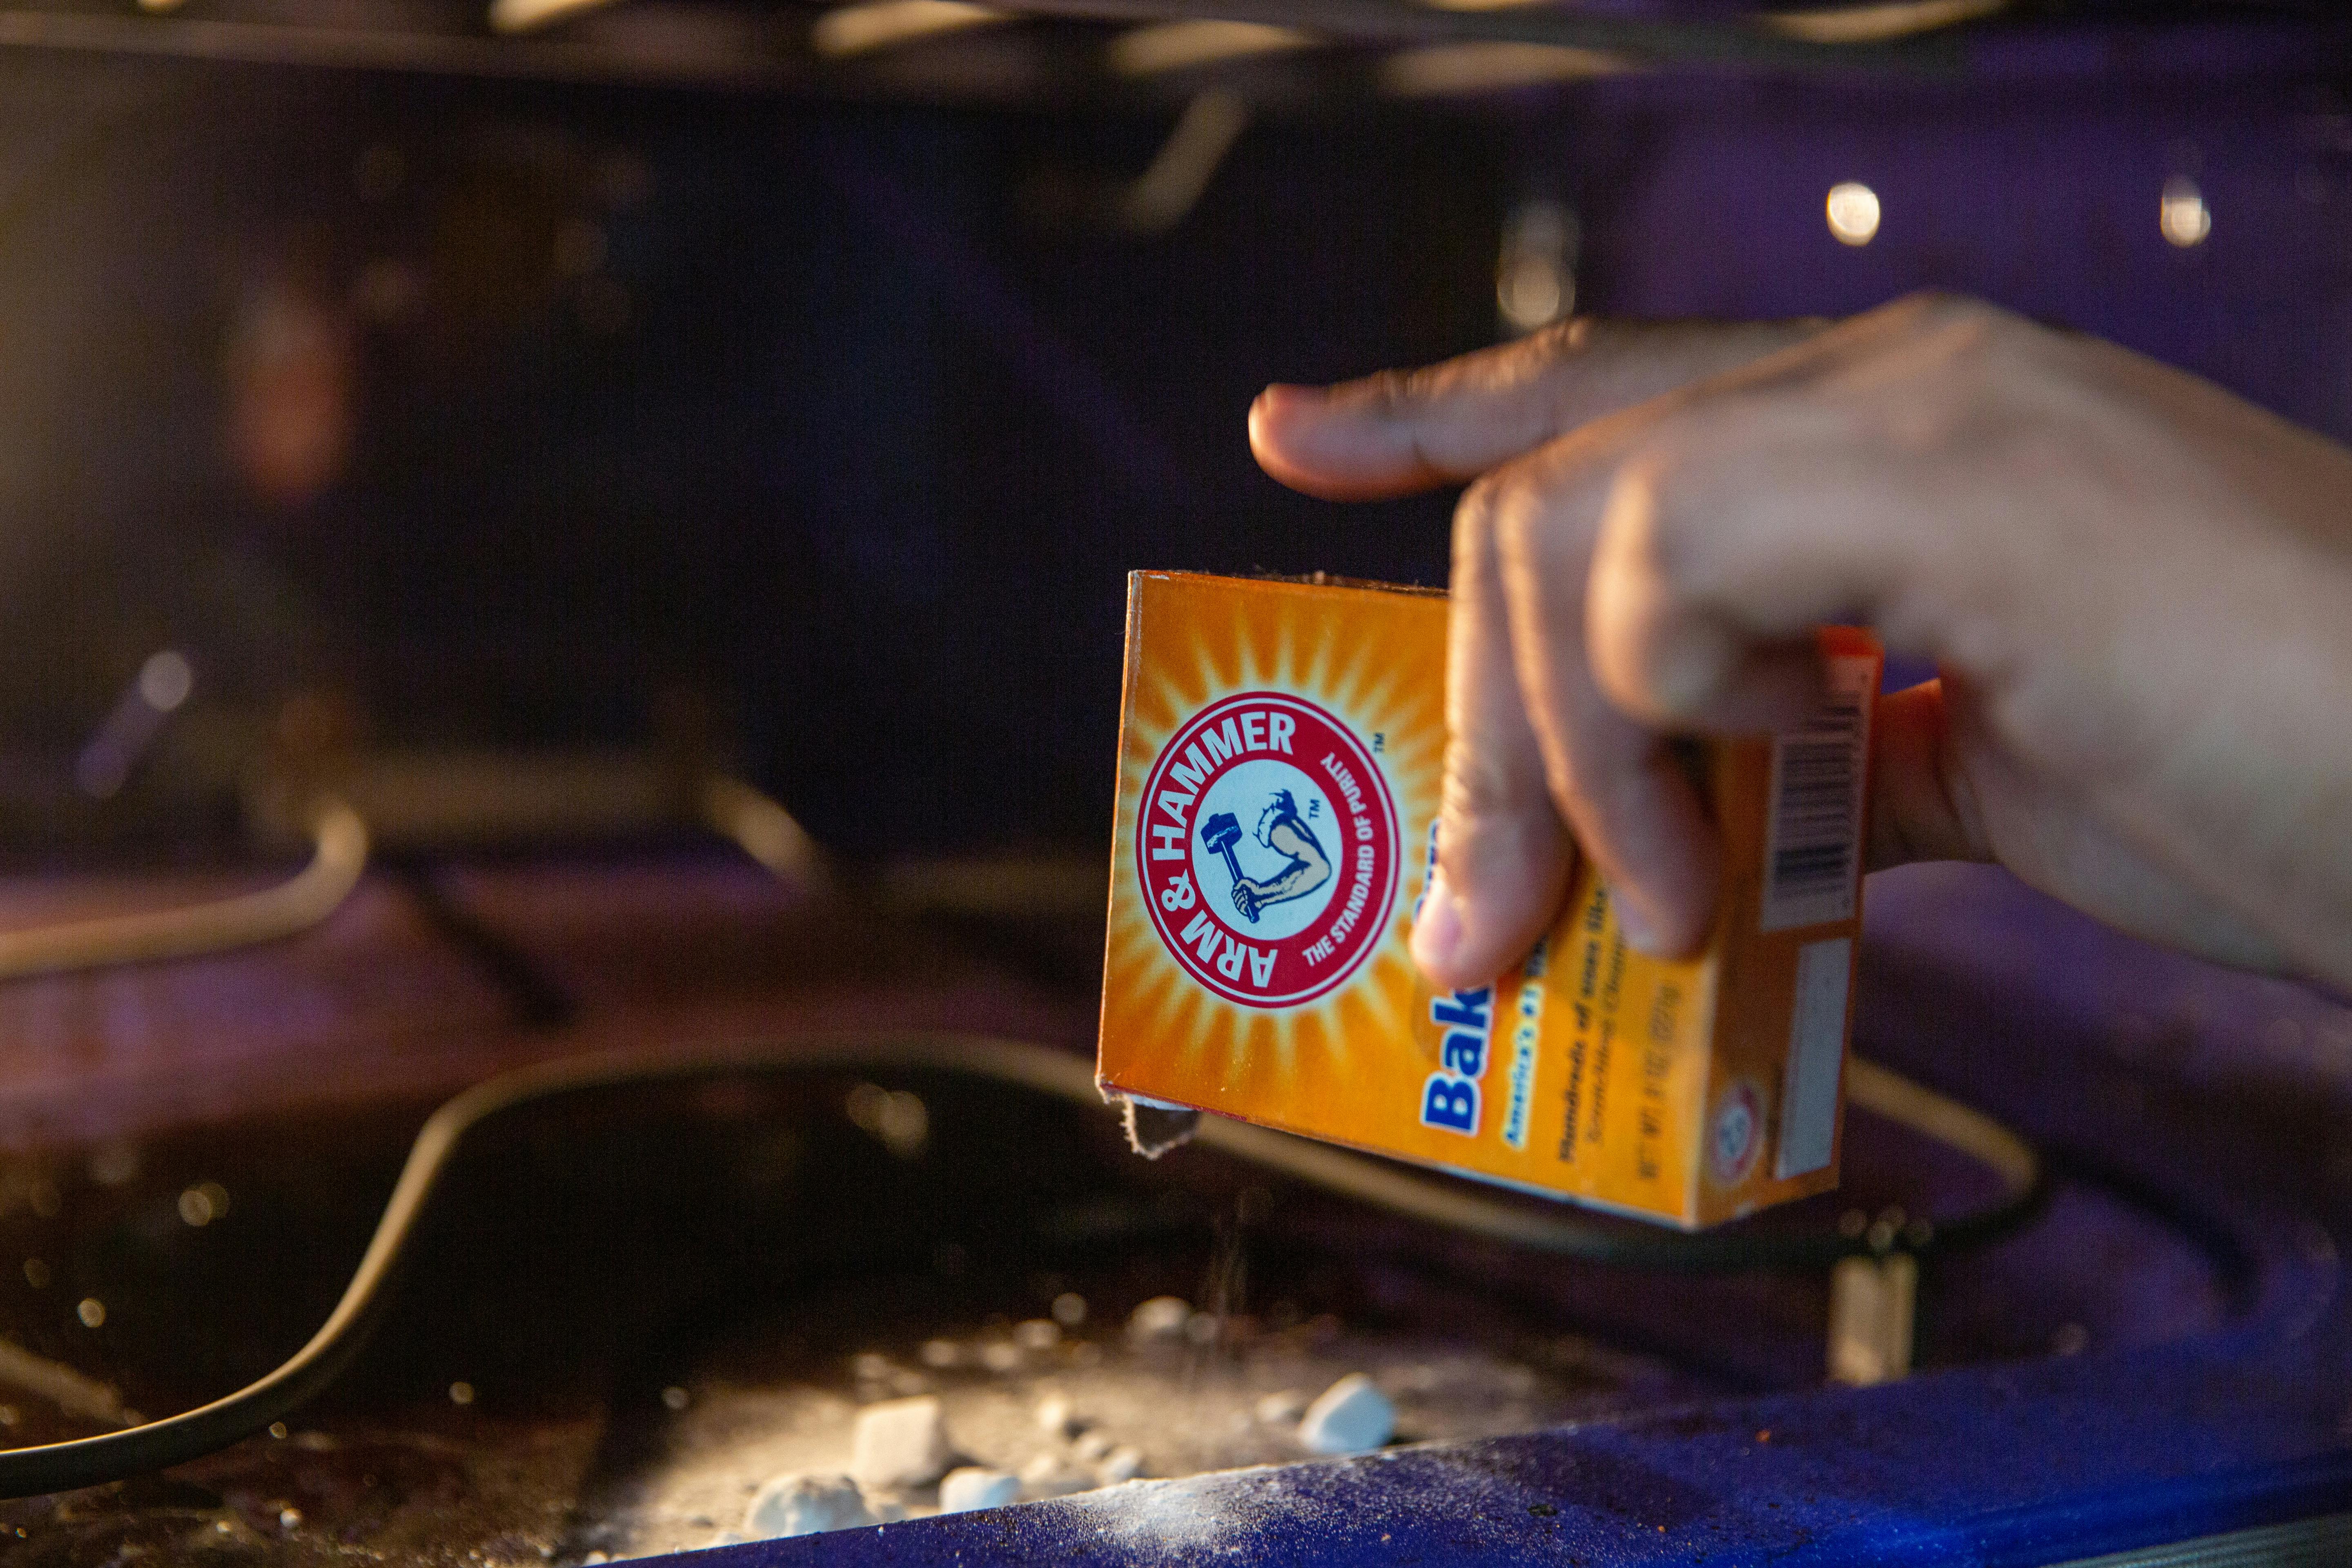 Adding "Arm & Hammer" baking soda inside the oven for a better clean